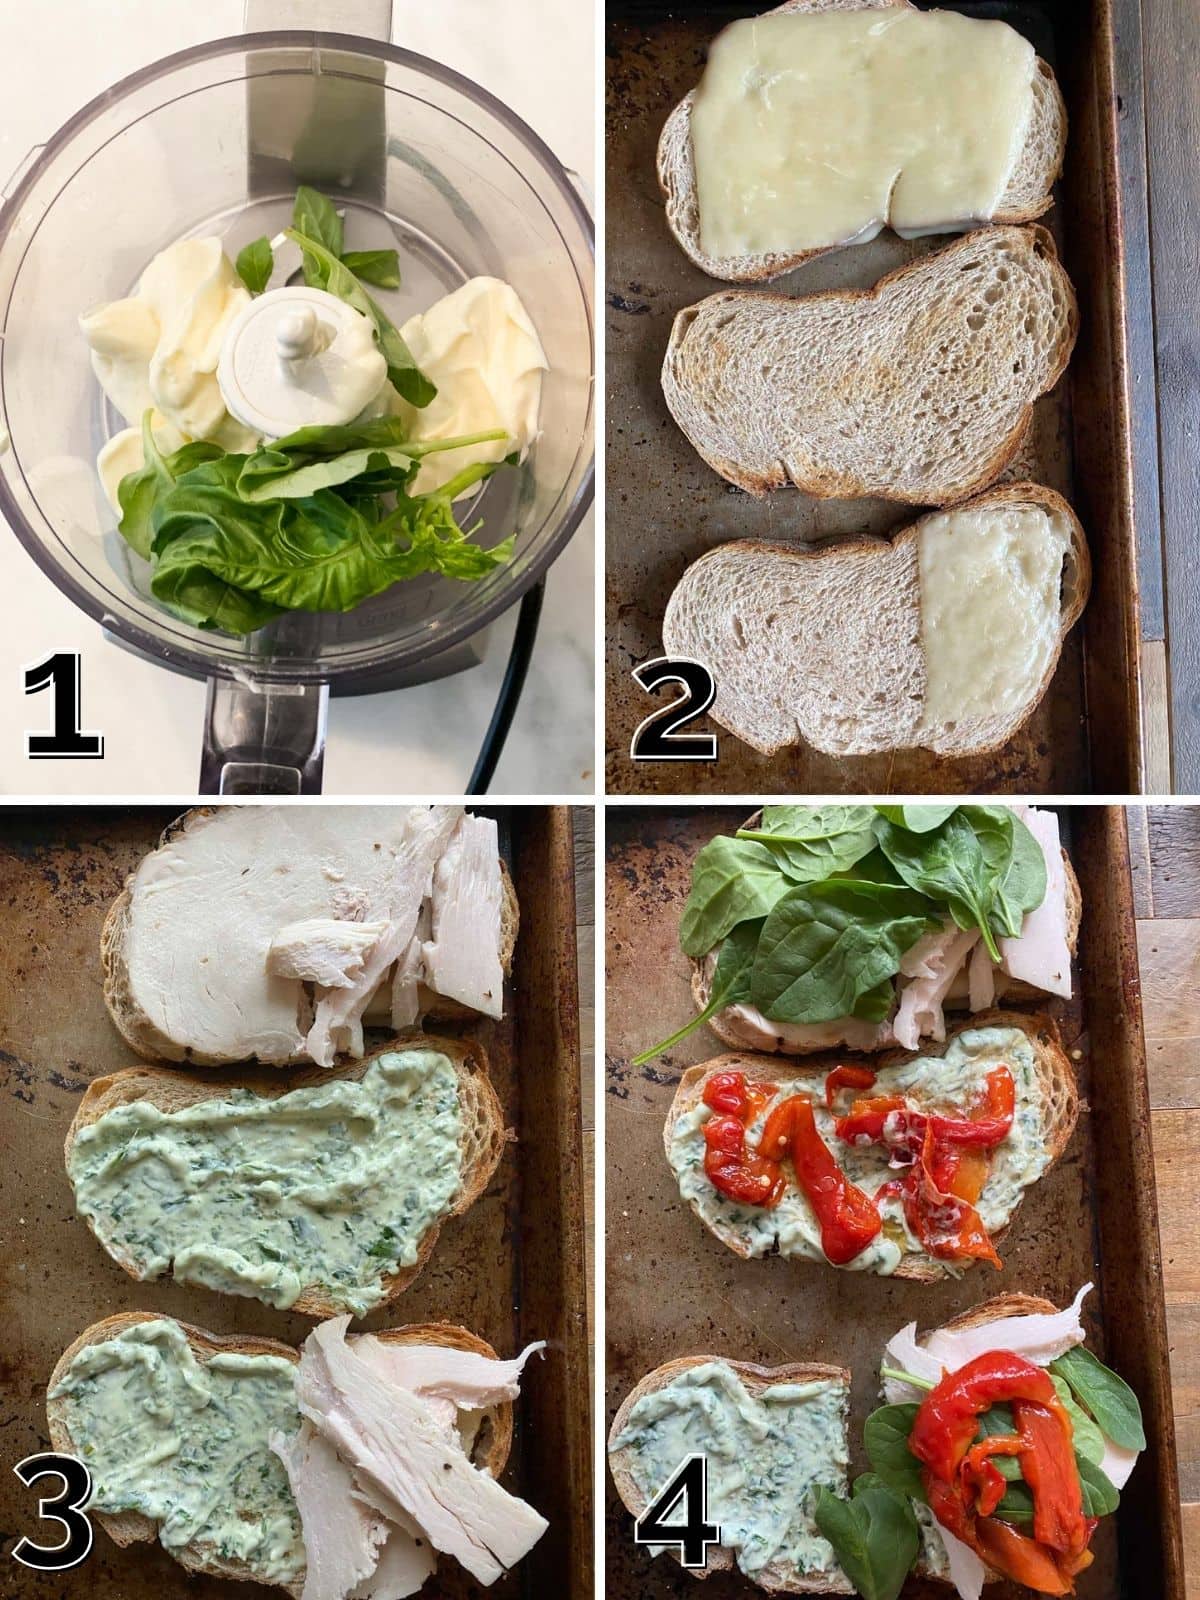 A step by step process of making a sandwich - making the pesto mayo, spreading it on bread, melting cheese, and assembling the sandwich.